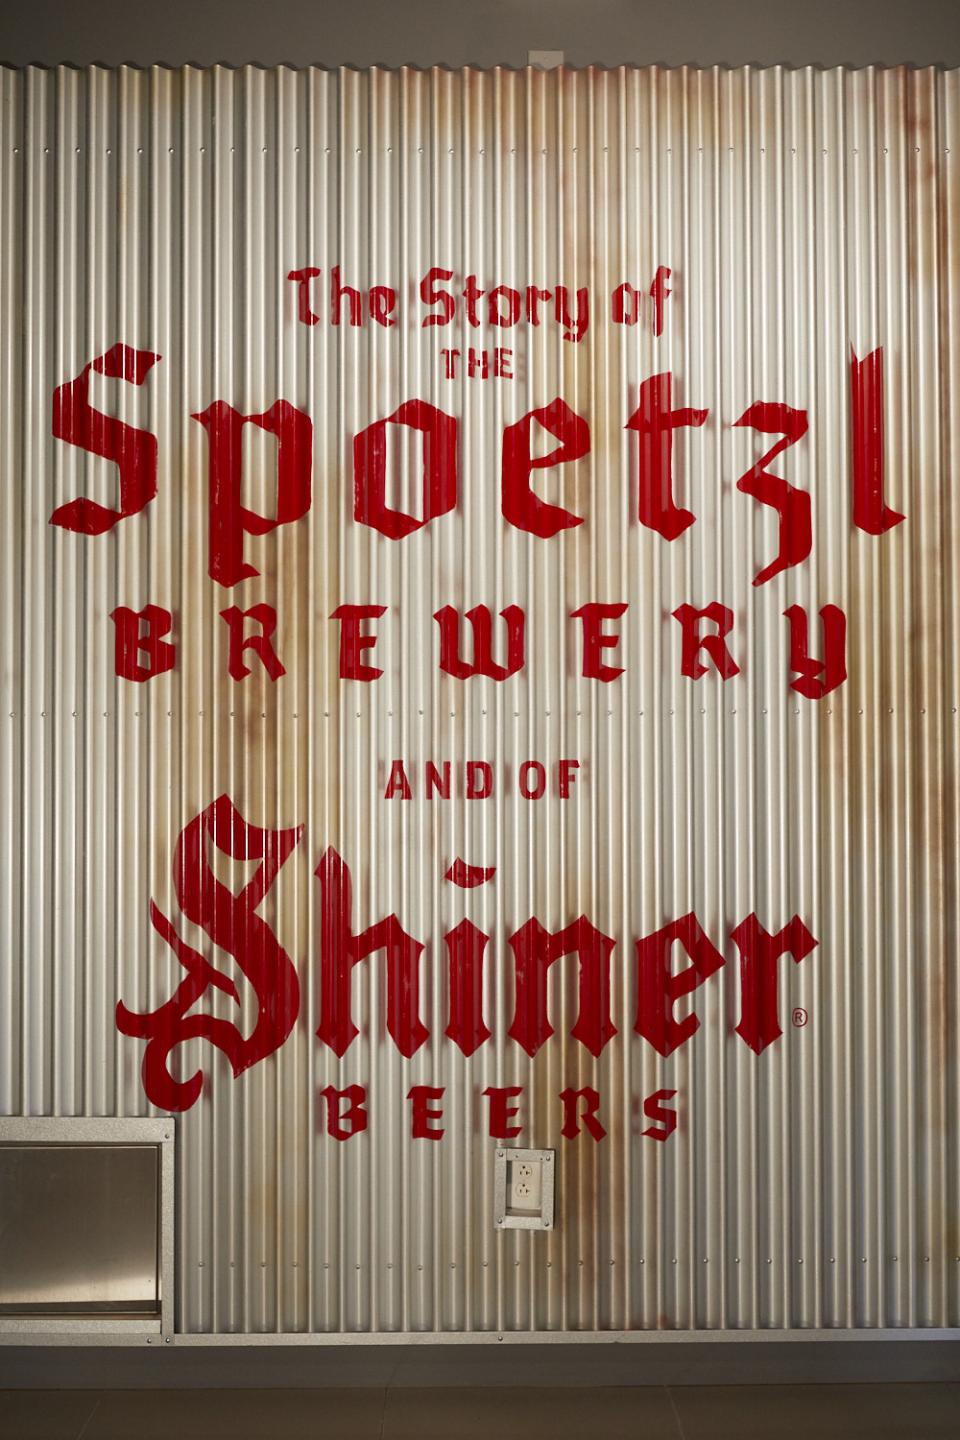 Shiner brewery guest experience tour design